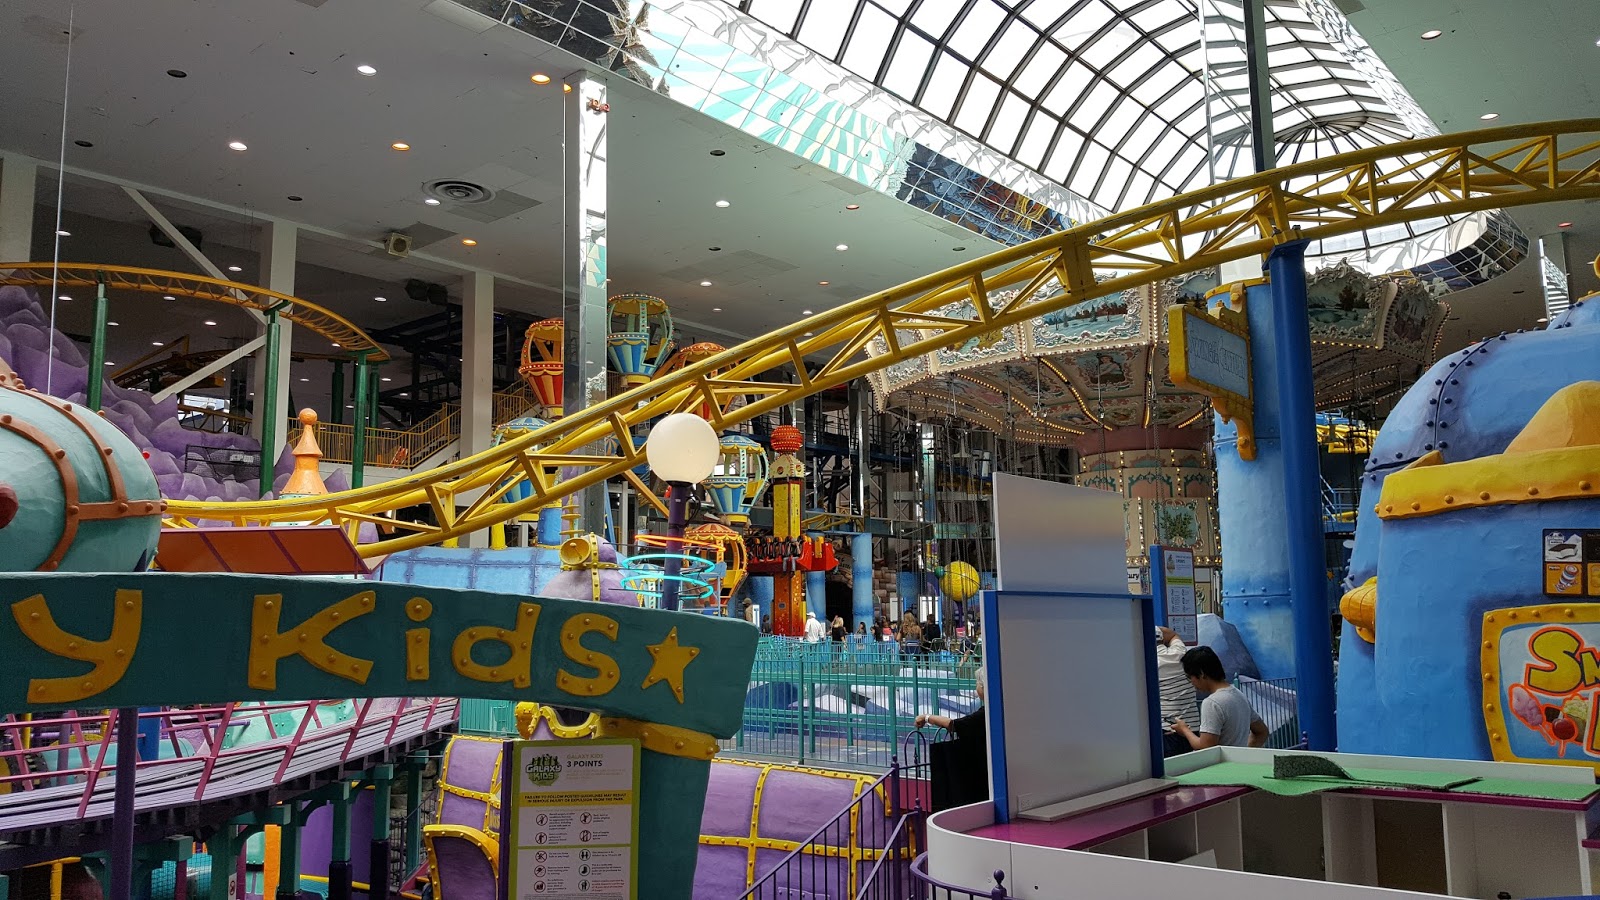 Blogging Strikes Me As Narcissistic But Having A Ball At West Edmonton Mall